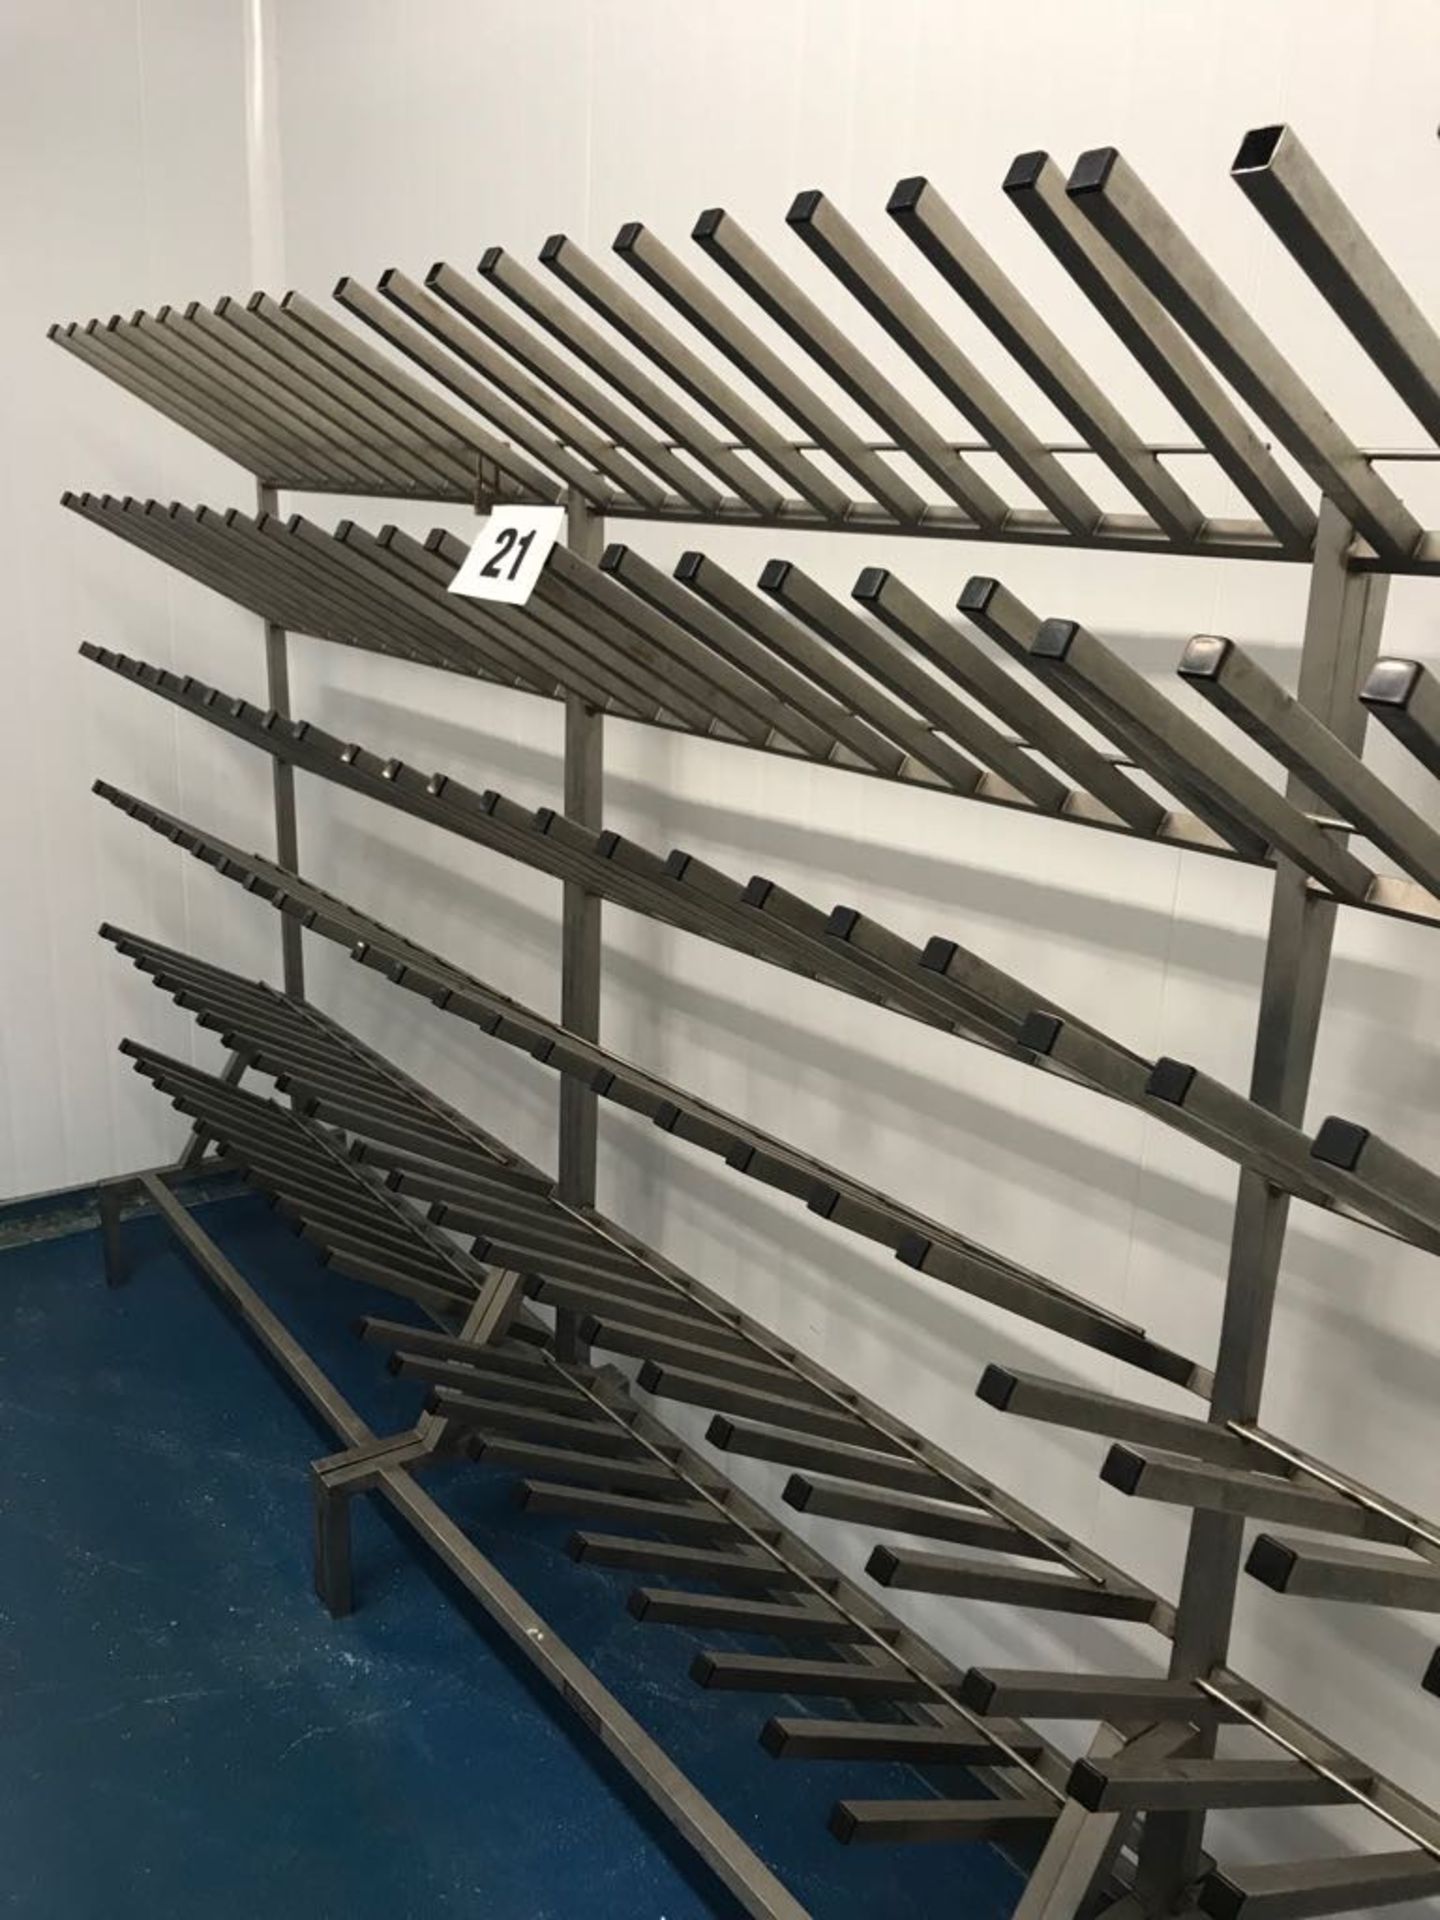 3 x boot holder racks. Holds 24 pairs. LO £20 - Image 2 of 3